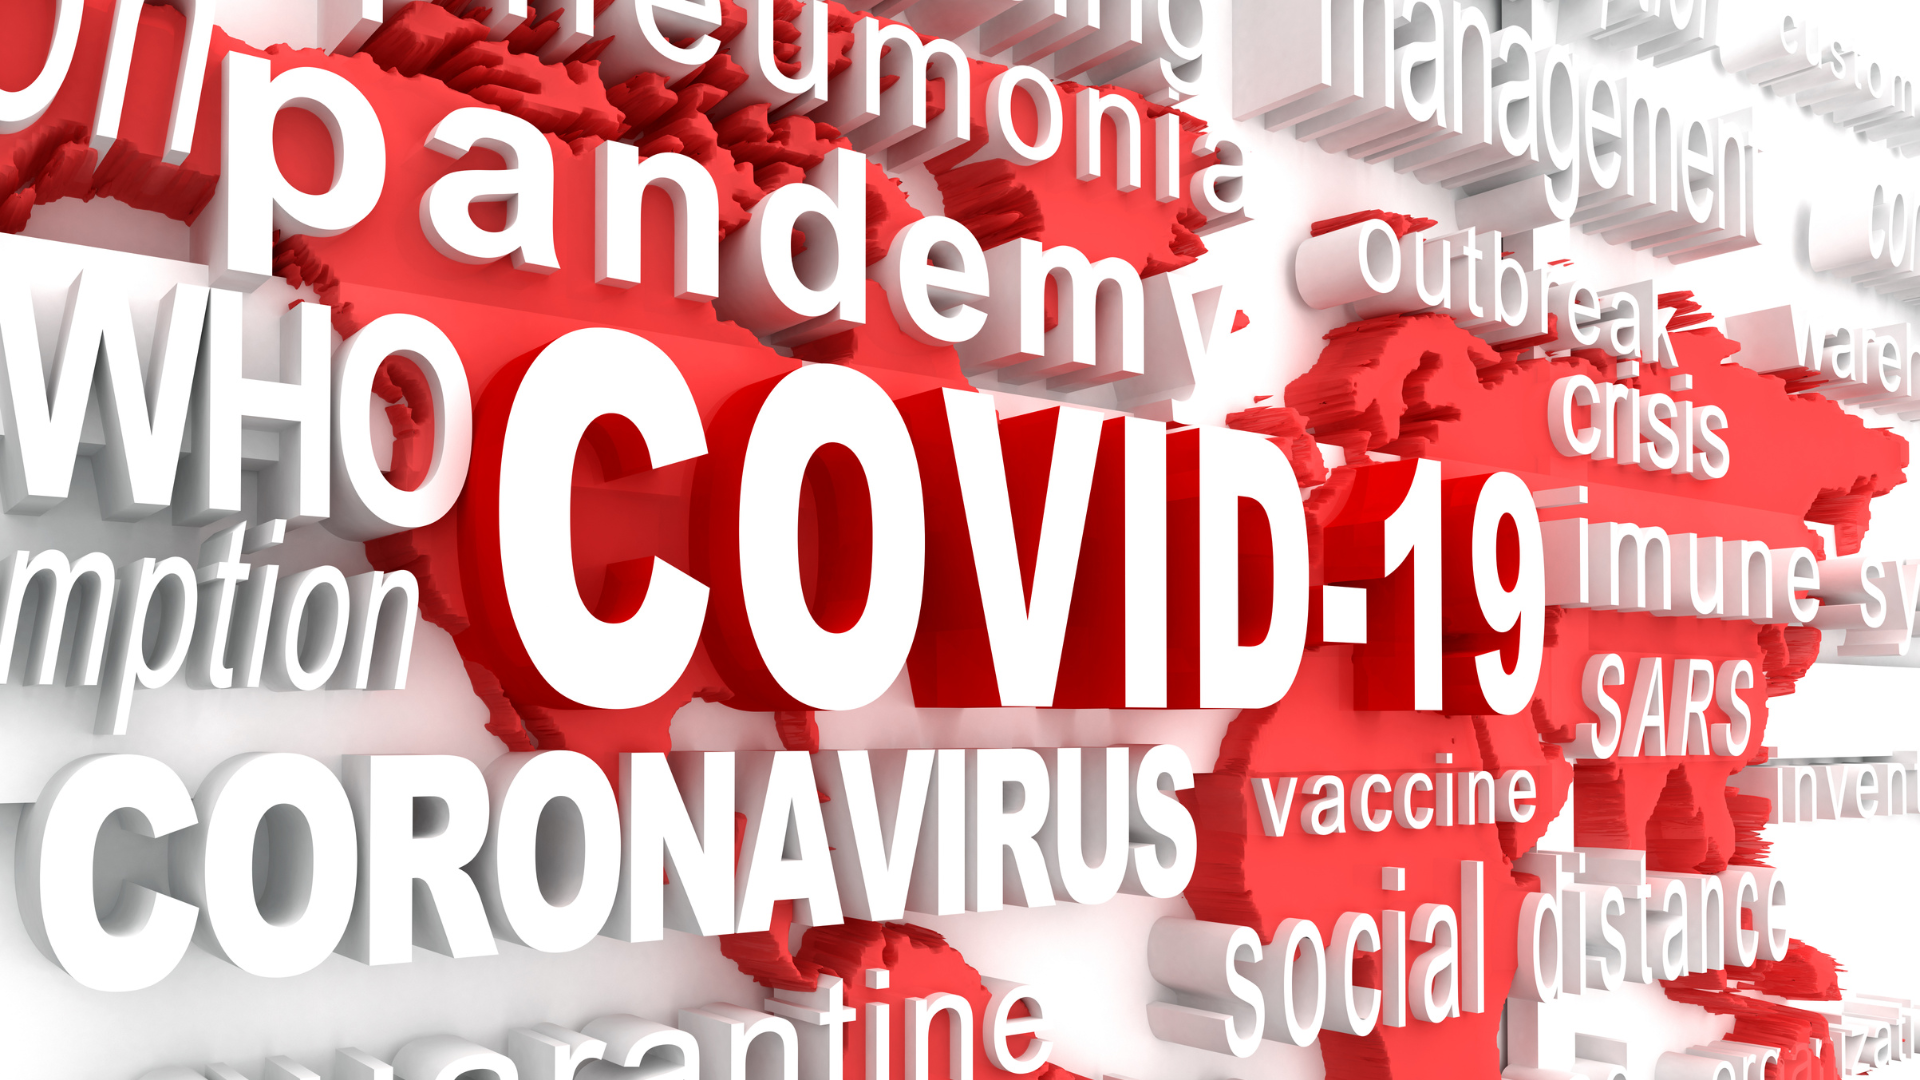 Graphic of COVID-19 pandemic-related terms such as 'pandemic', 'WHO', 'coronavirus', 'vaccine', and 'social distance' in red and white, with the word 'COVID-19' prominently featured in the center.